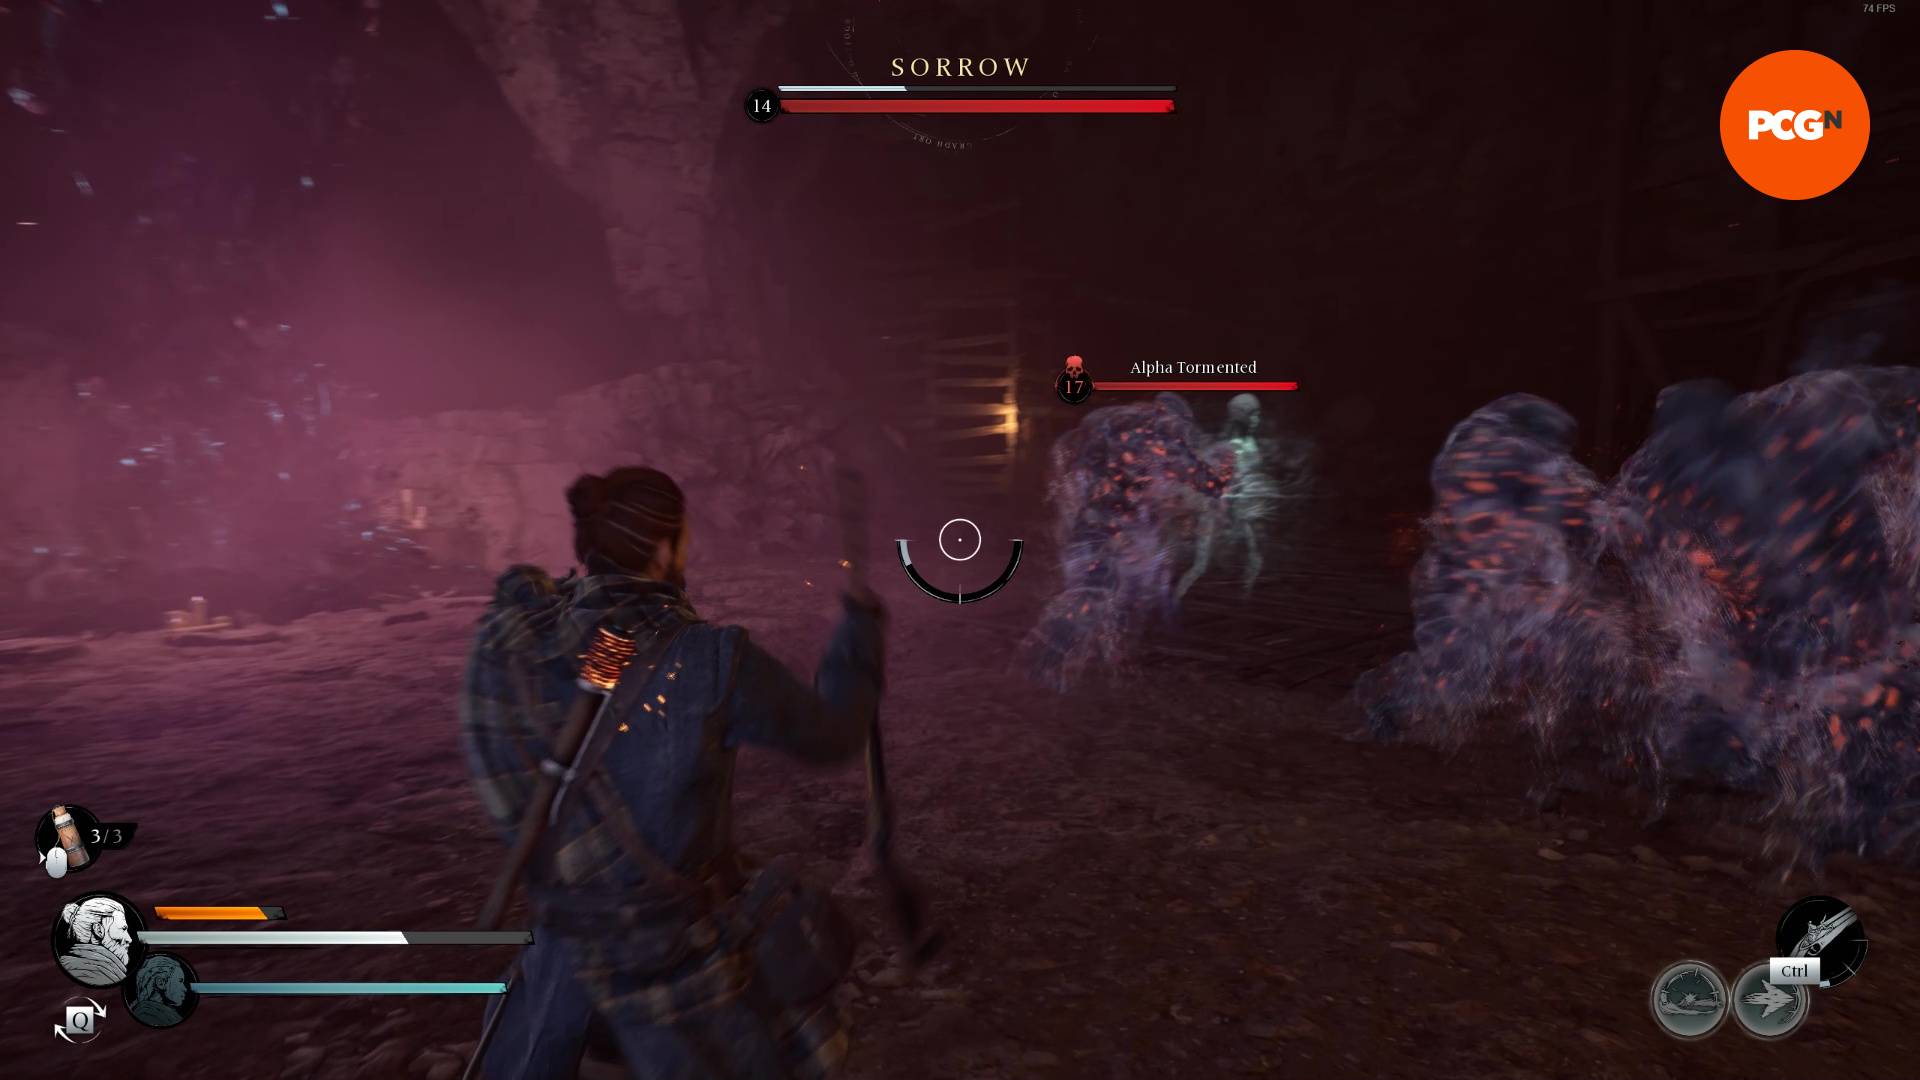 Fighting the second Sorrow boss in Banishers: Ghosts of New Eden.